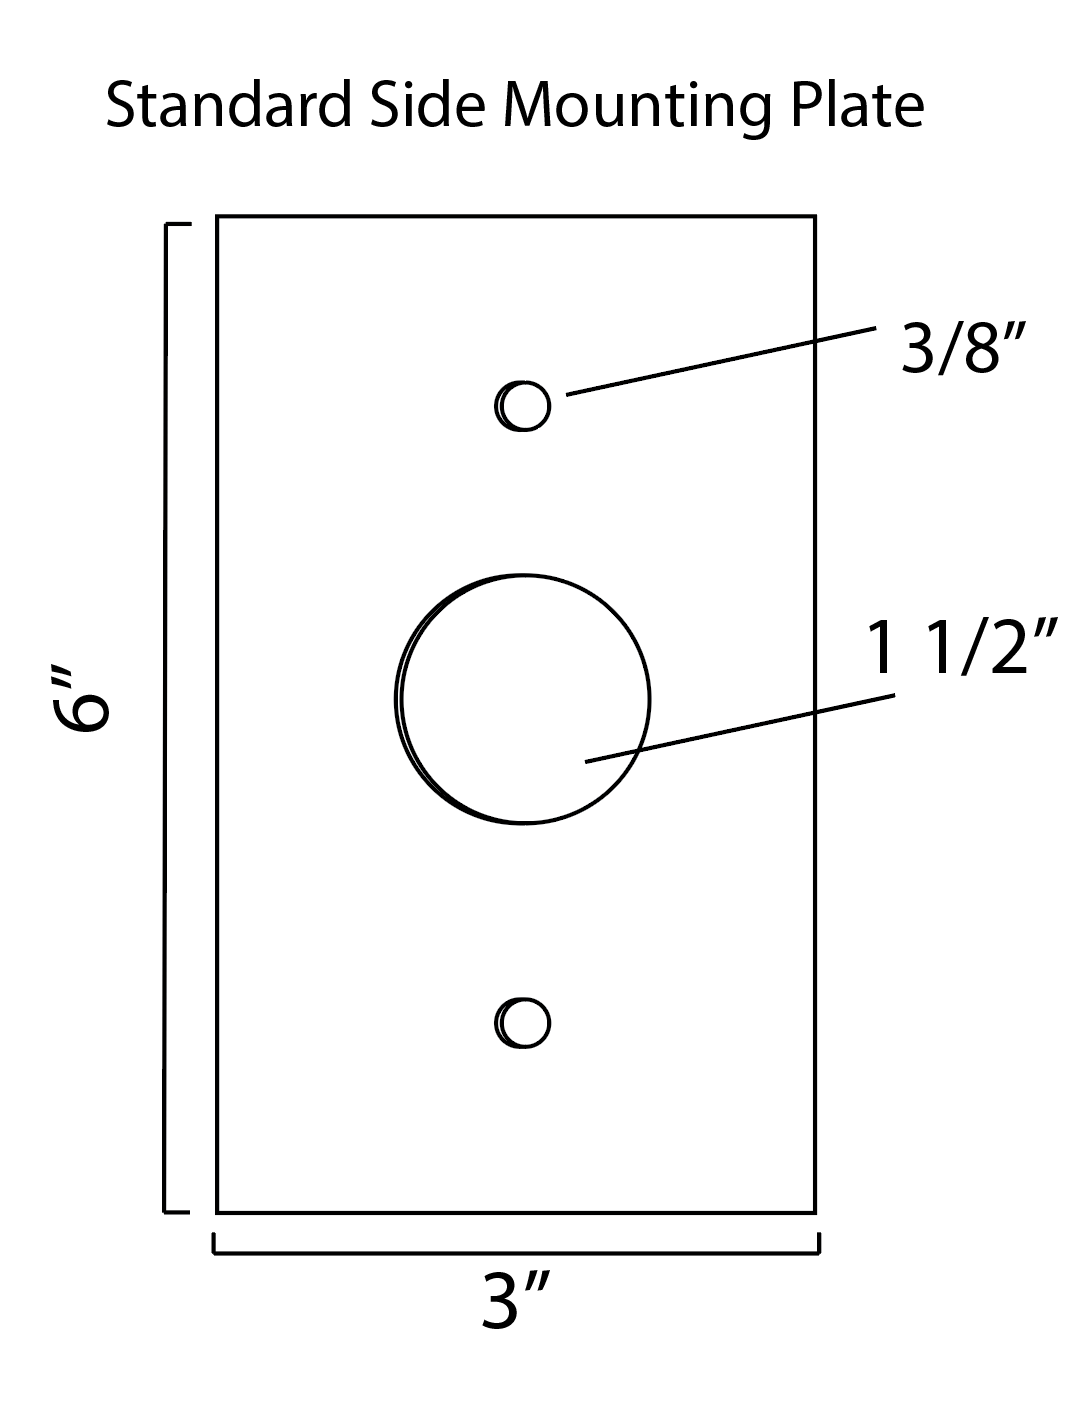 Standard Side Mounting Plate Diagram